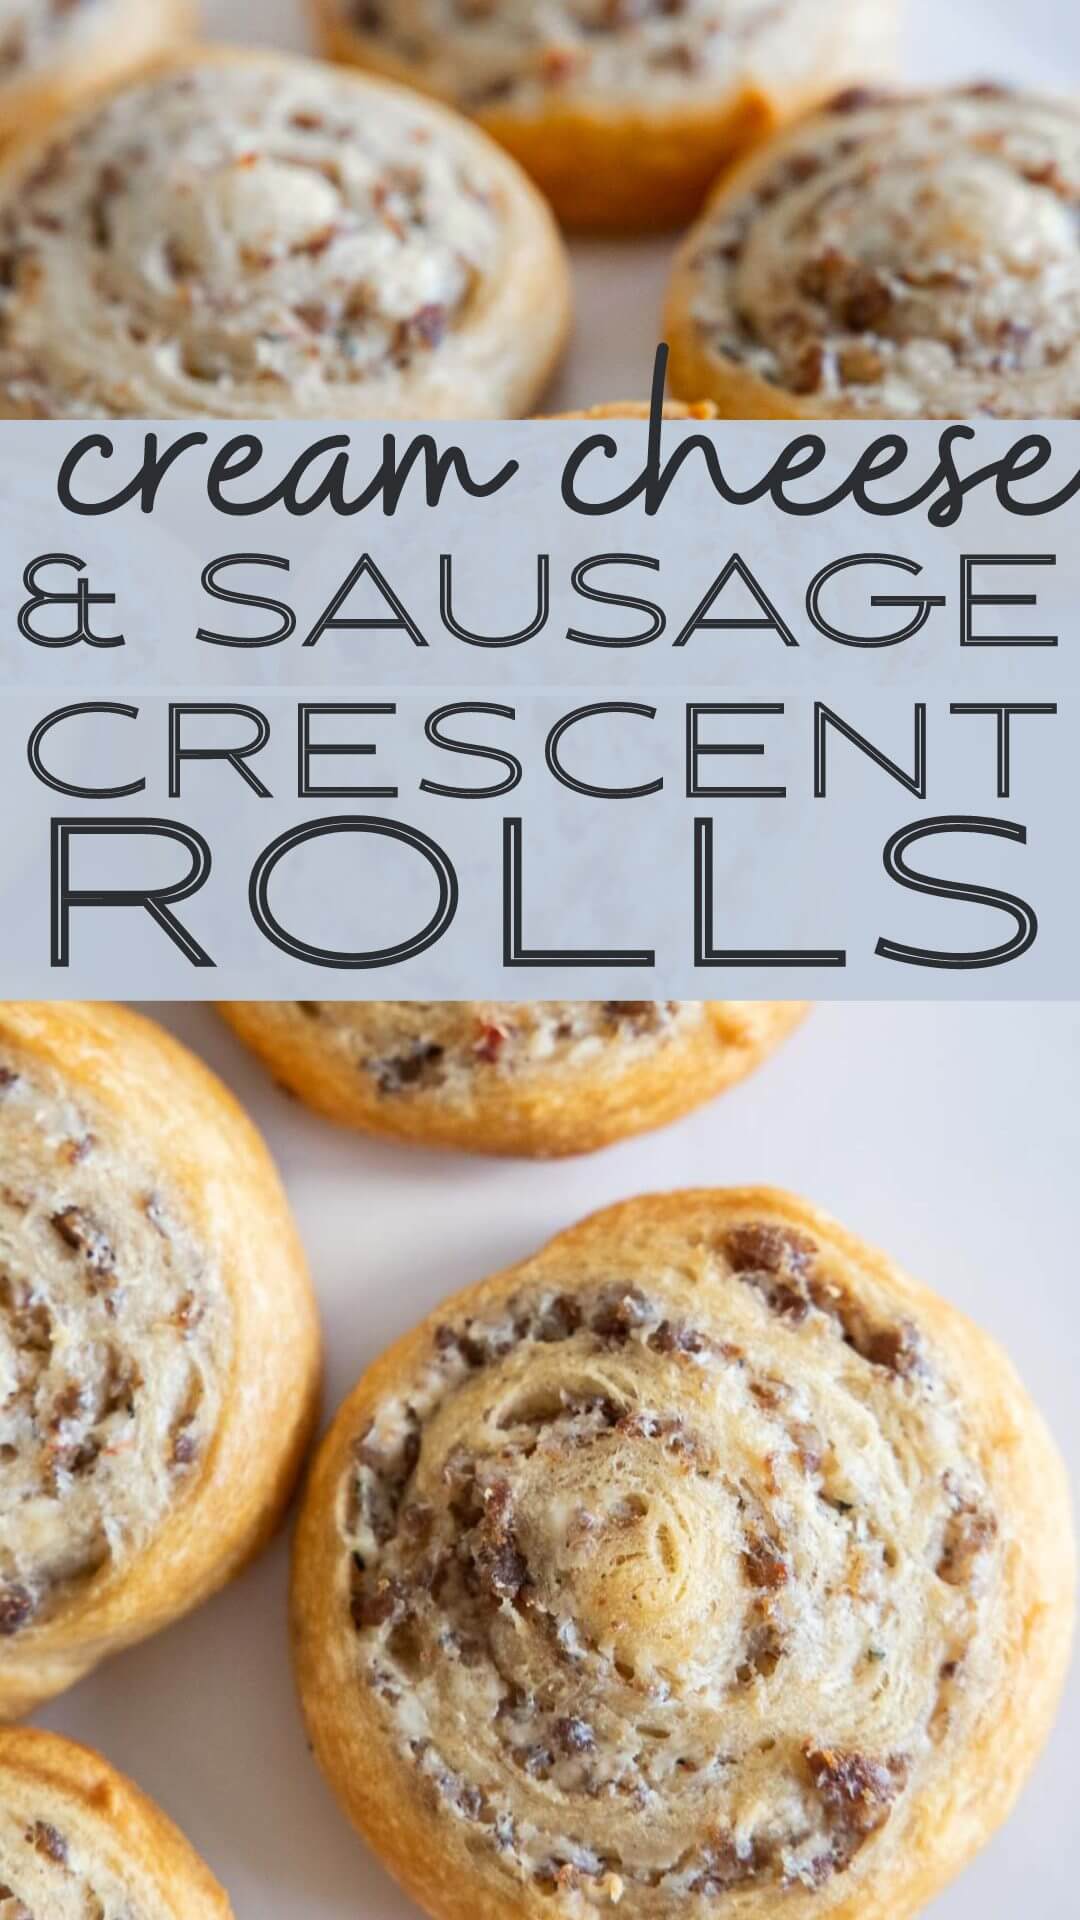 These sausage and cream cheese crescent rolls are an amazing, easy snack or appetizer to make for a party, afternoon snack and more! Perfect for a super bowl party too!